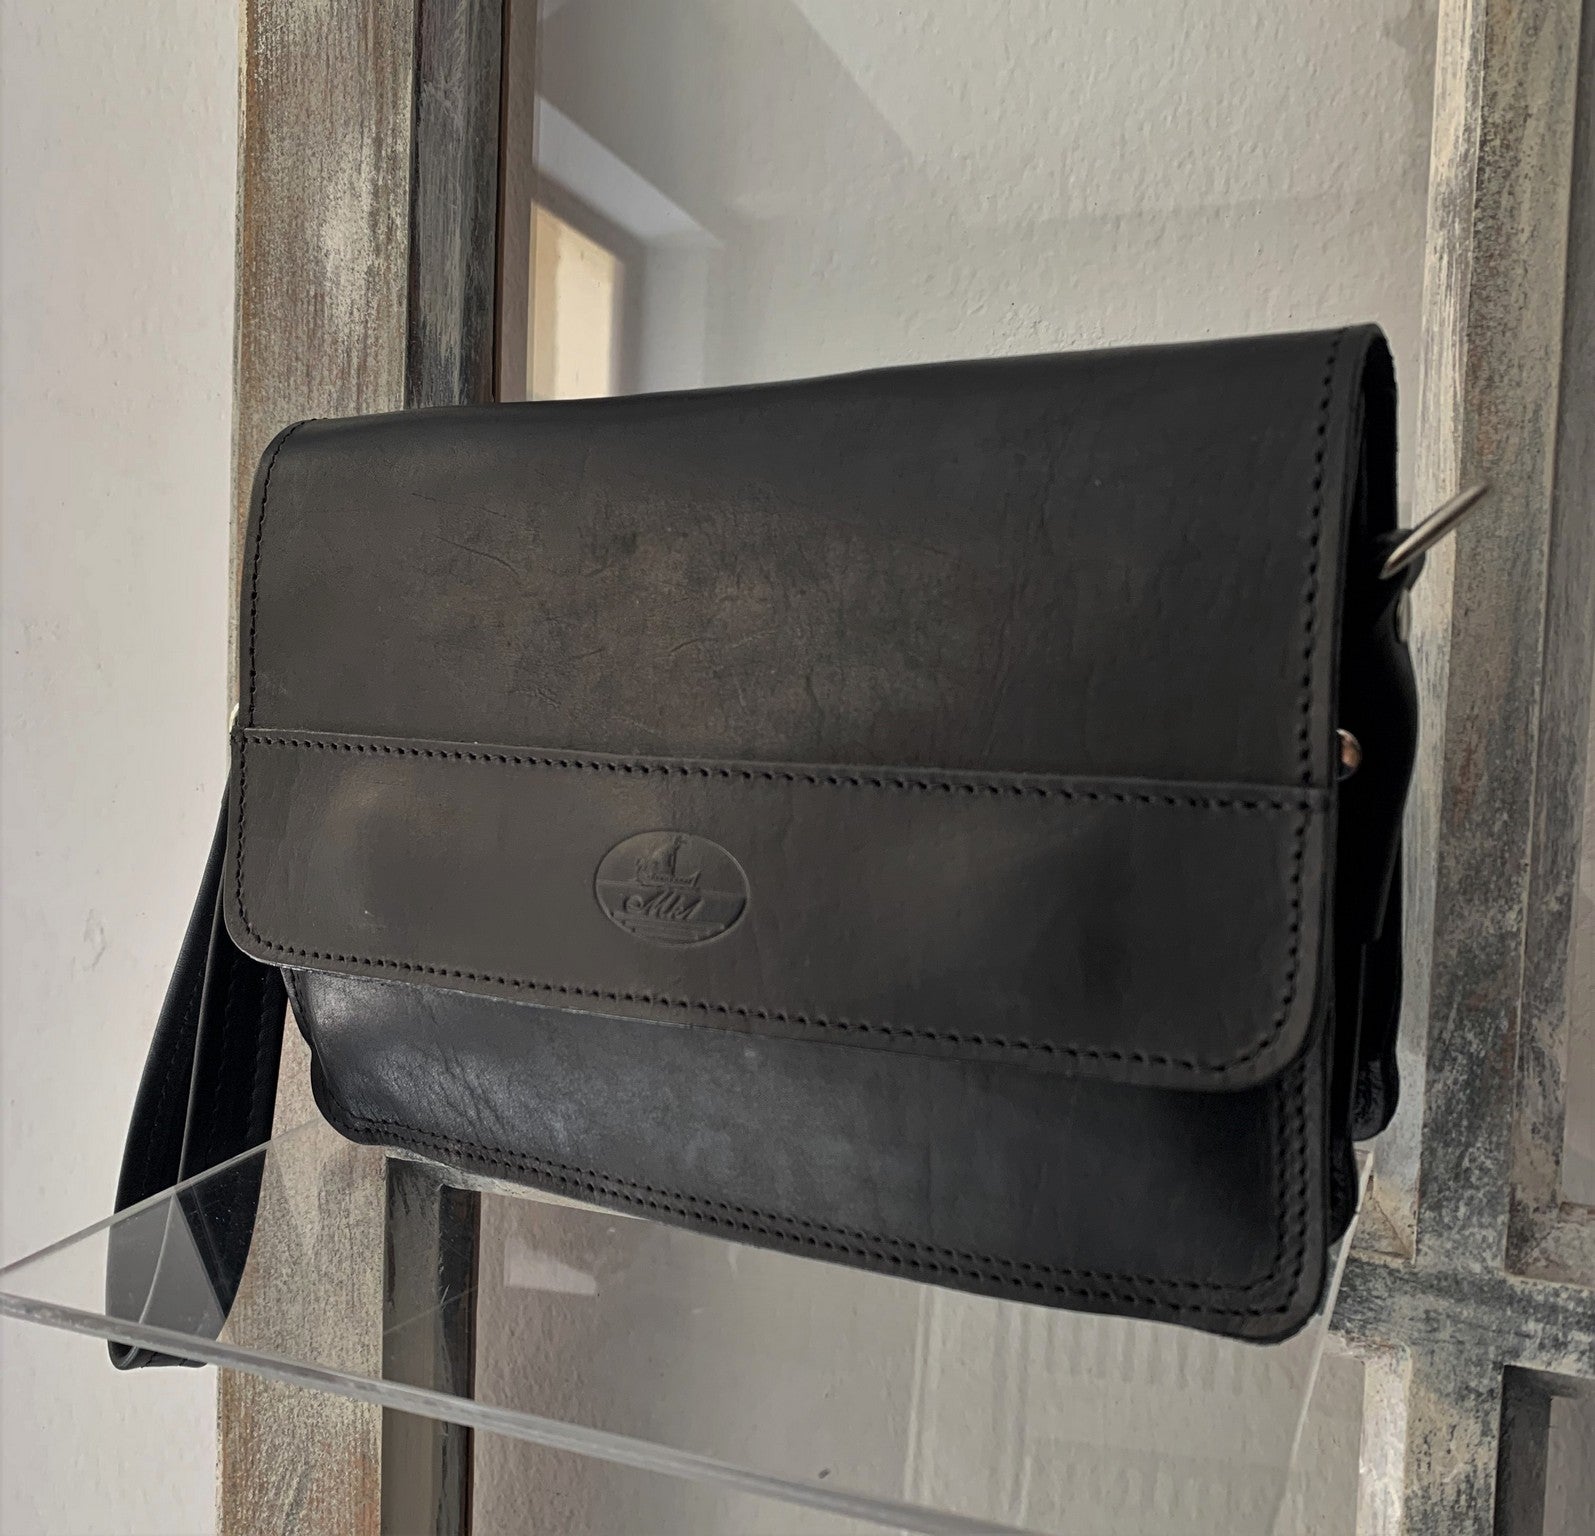 "Sokratis" - small crossbody bag handcrafted from natural black leather WT/55M